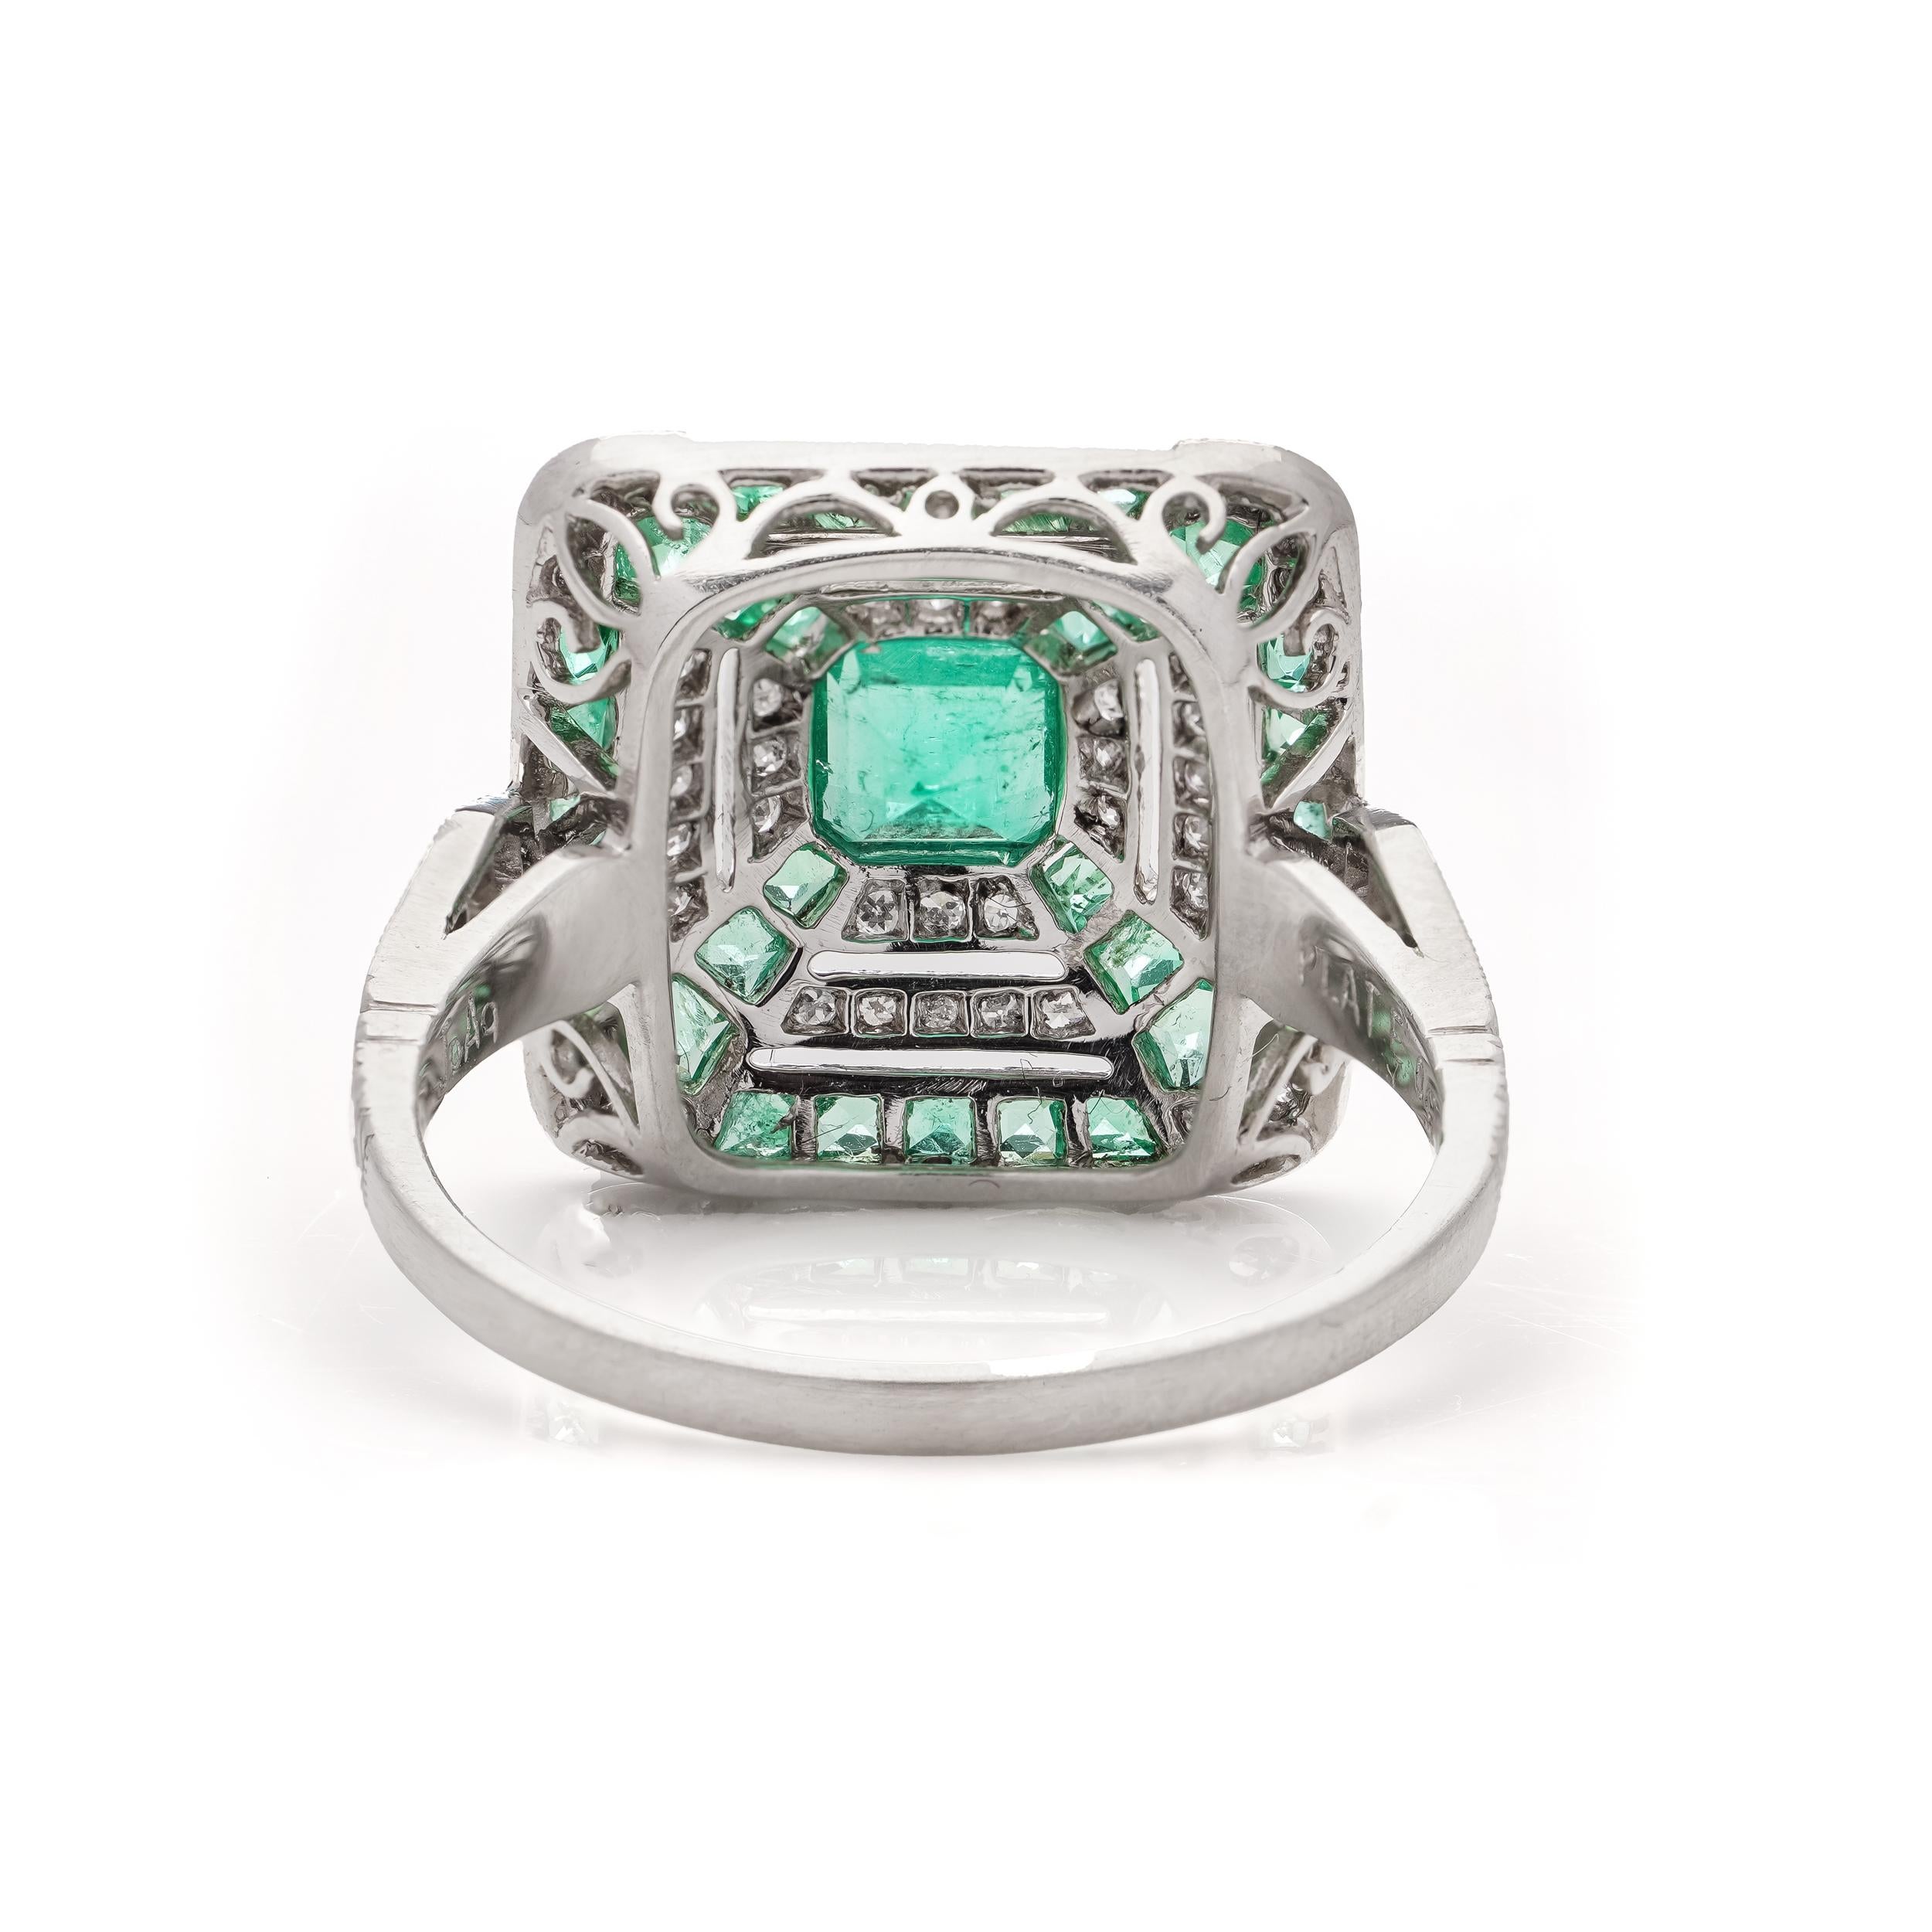 Women's Platinum Art Deco-inspired 0.42 carats of Emerald fashion ring For Sale